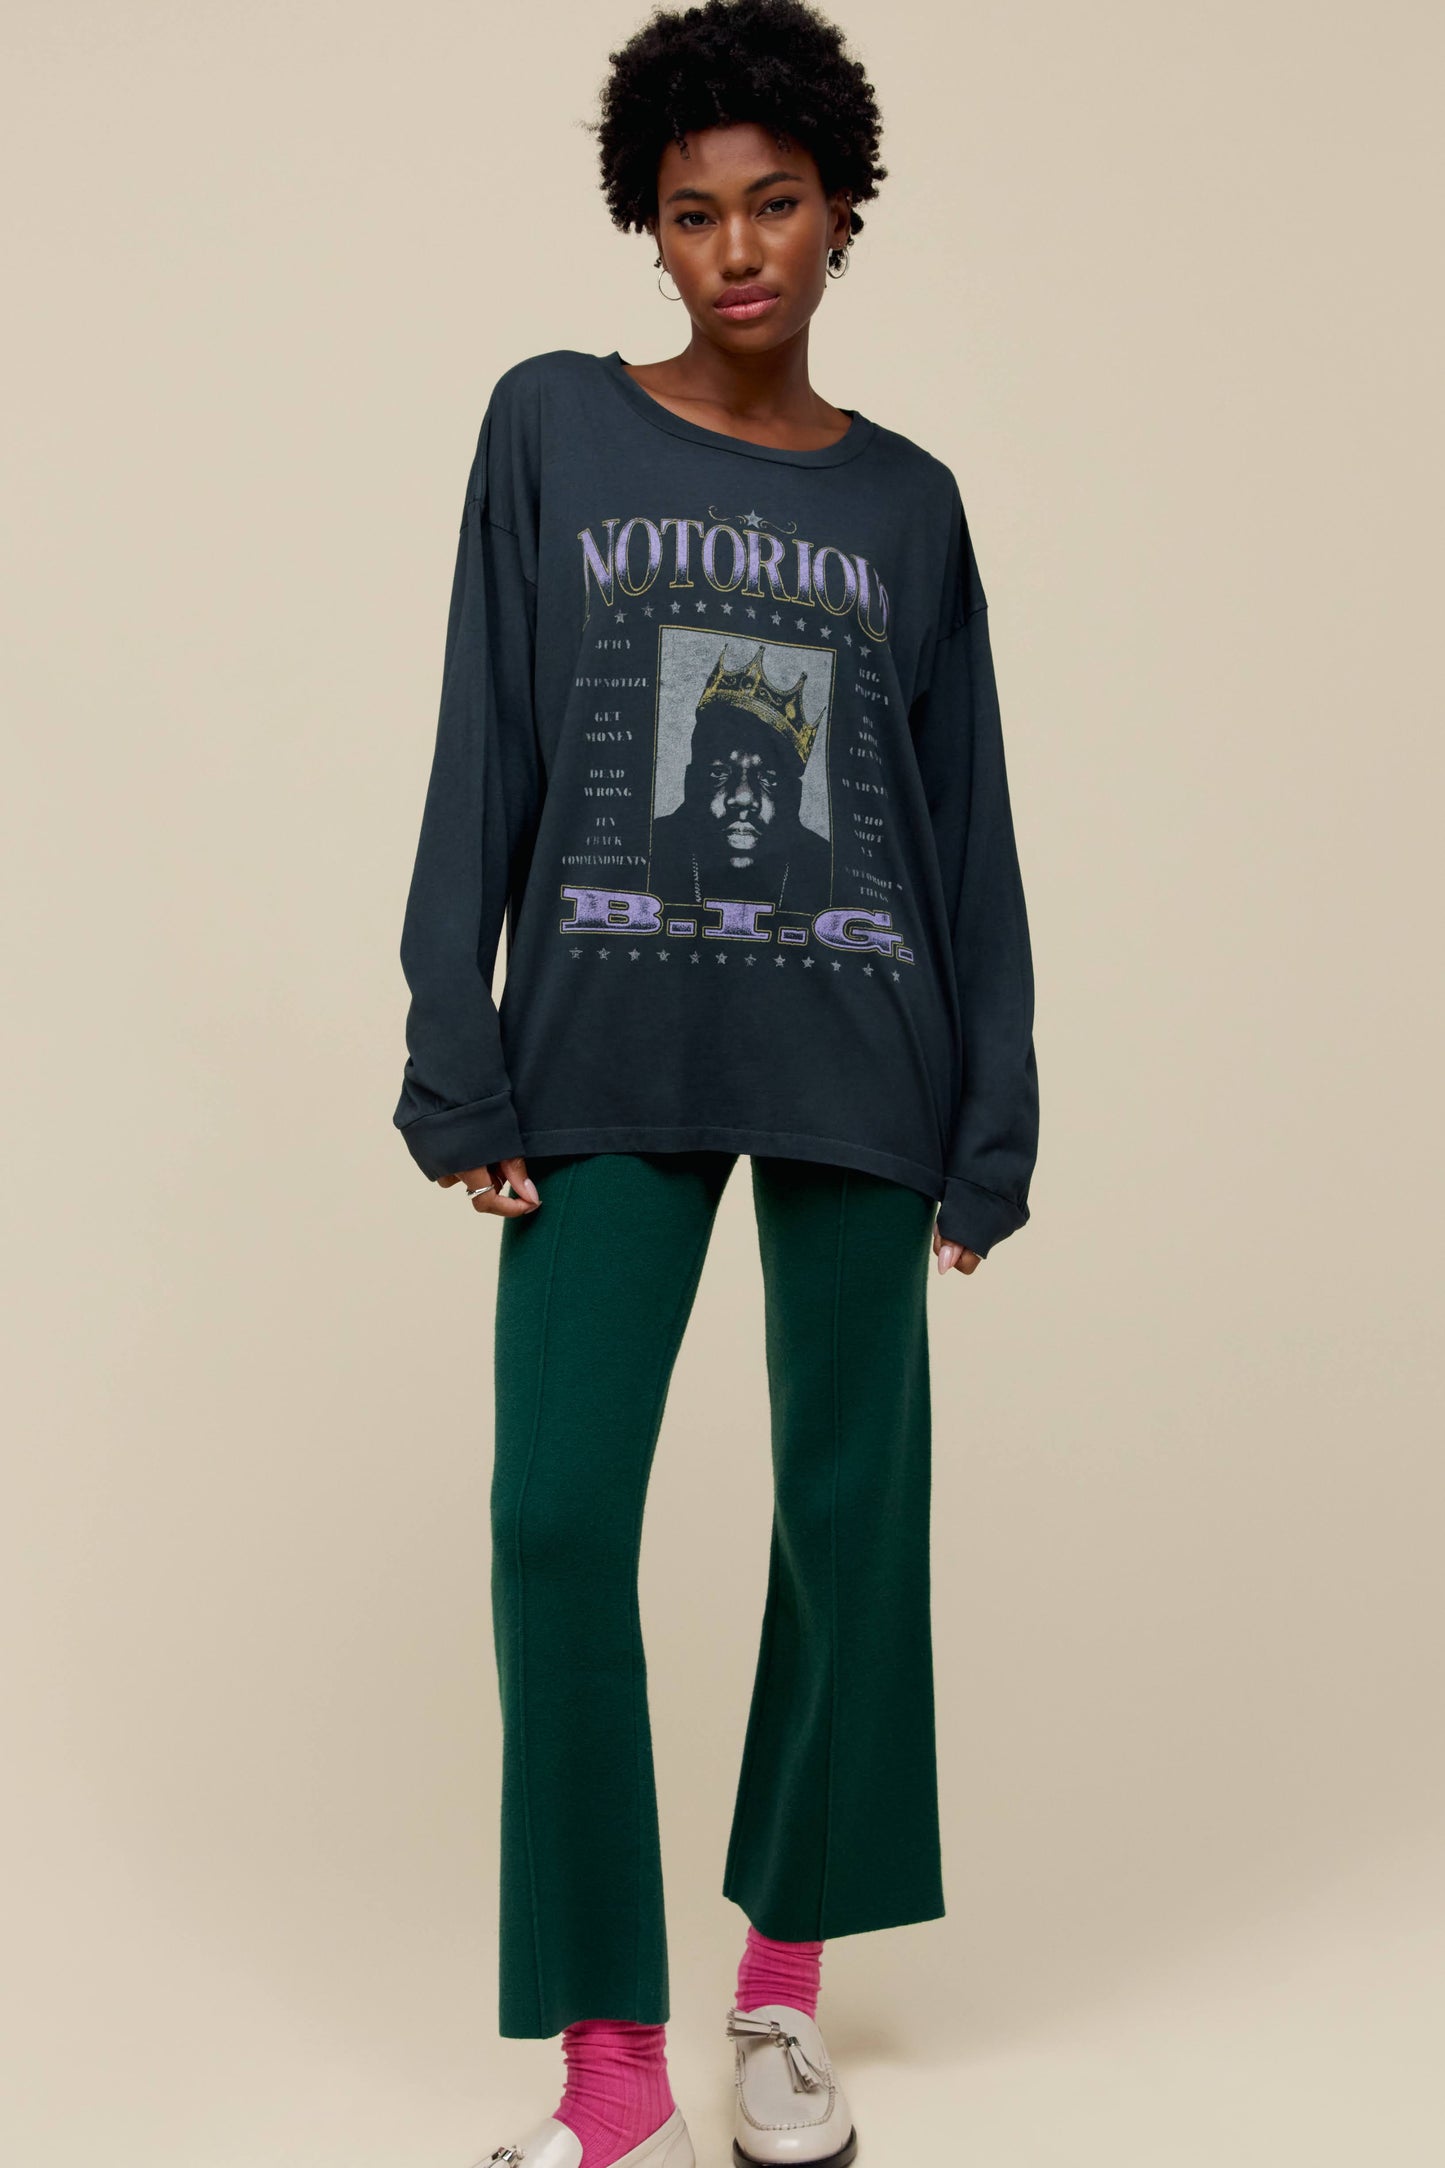 A model featuring a black long sleeve stamped with Notorious and a portrait of the artist.